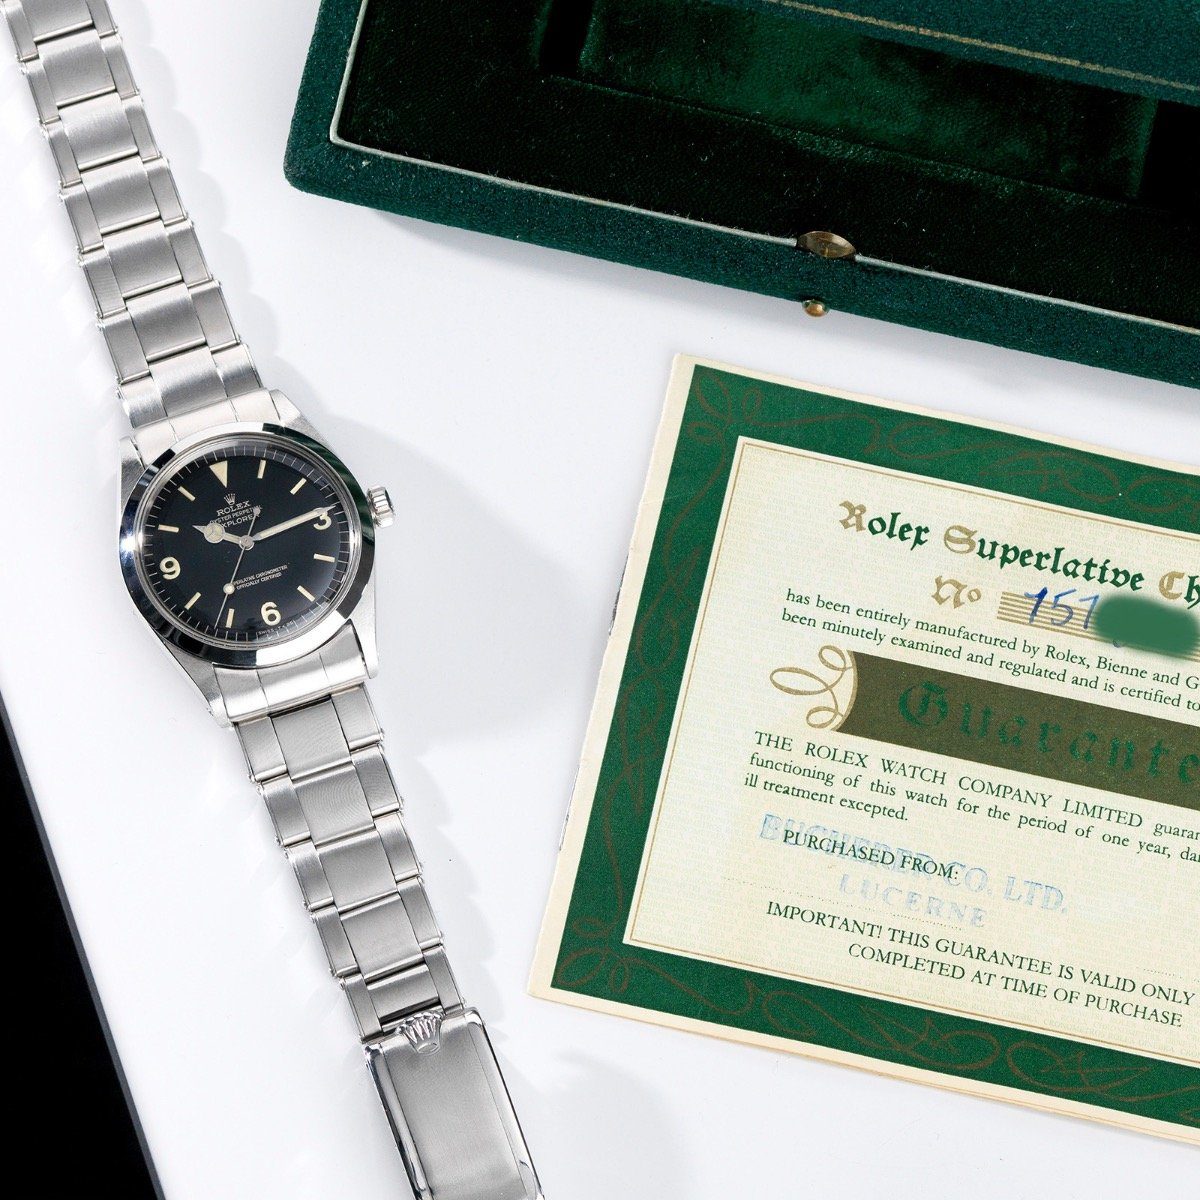 Rolex Explorer Gilt Dial 1016 Box and Papers